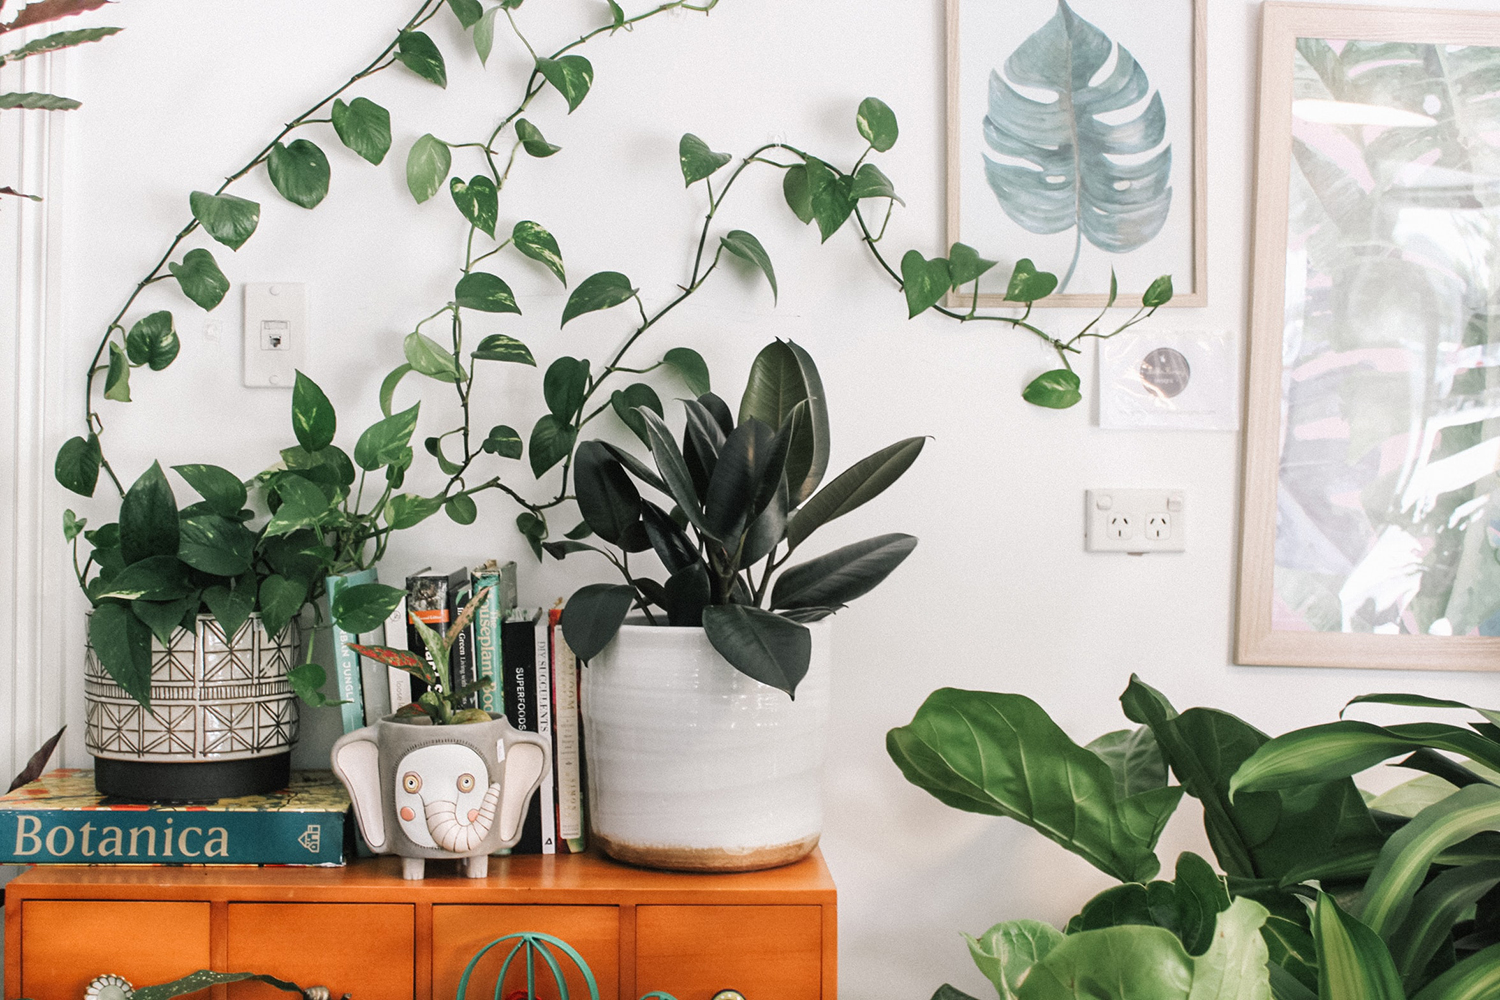 The Top 3 Reasons Your Houseplant Might Be Dying